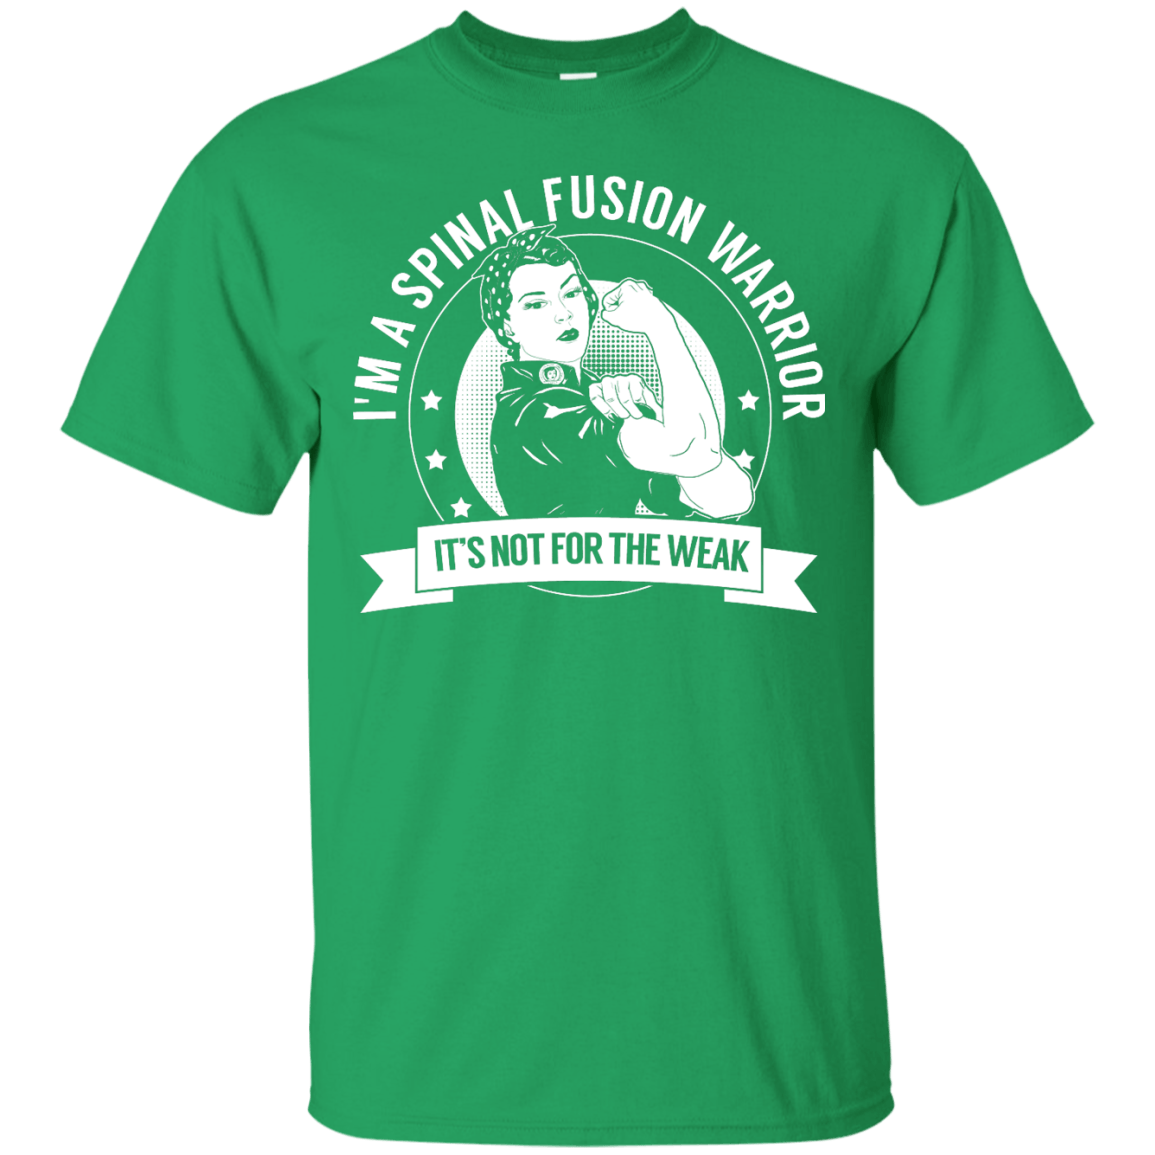 Spinal Fusion Warrior Not For The Weak Unisex Shirt - The Unchargeables